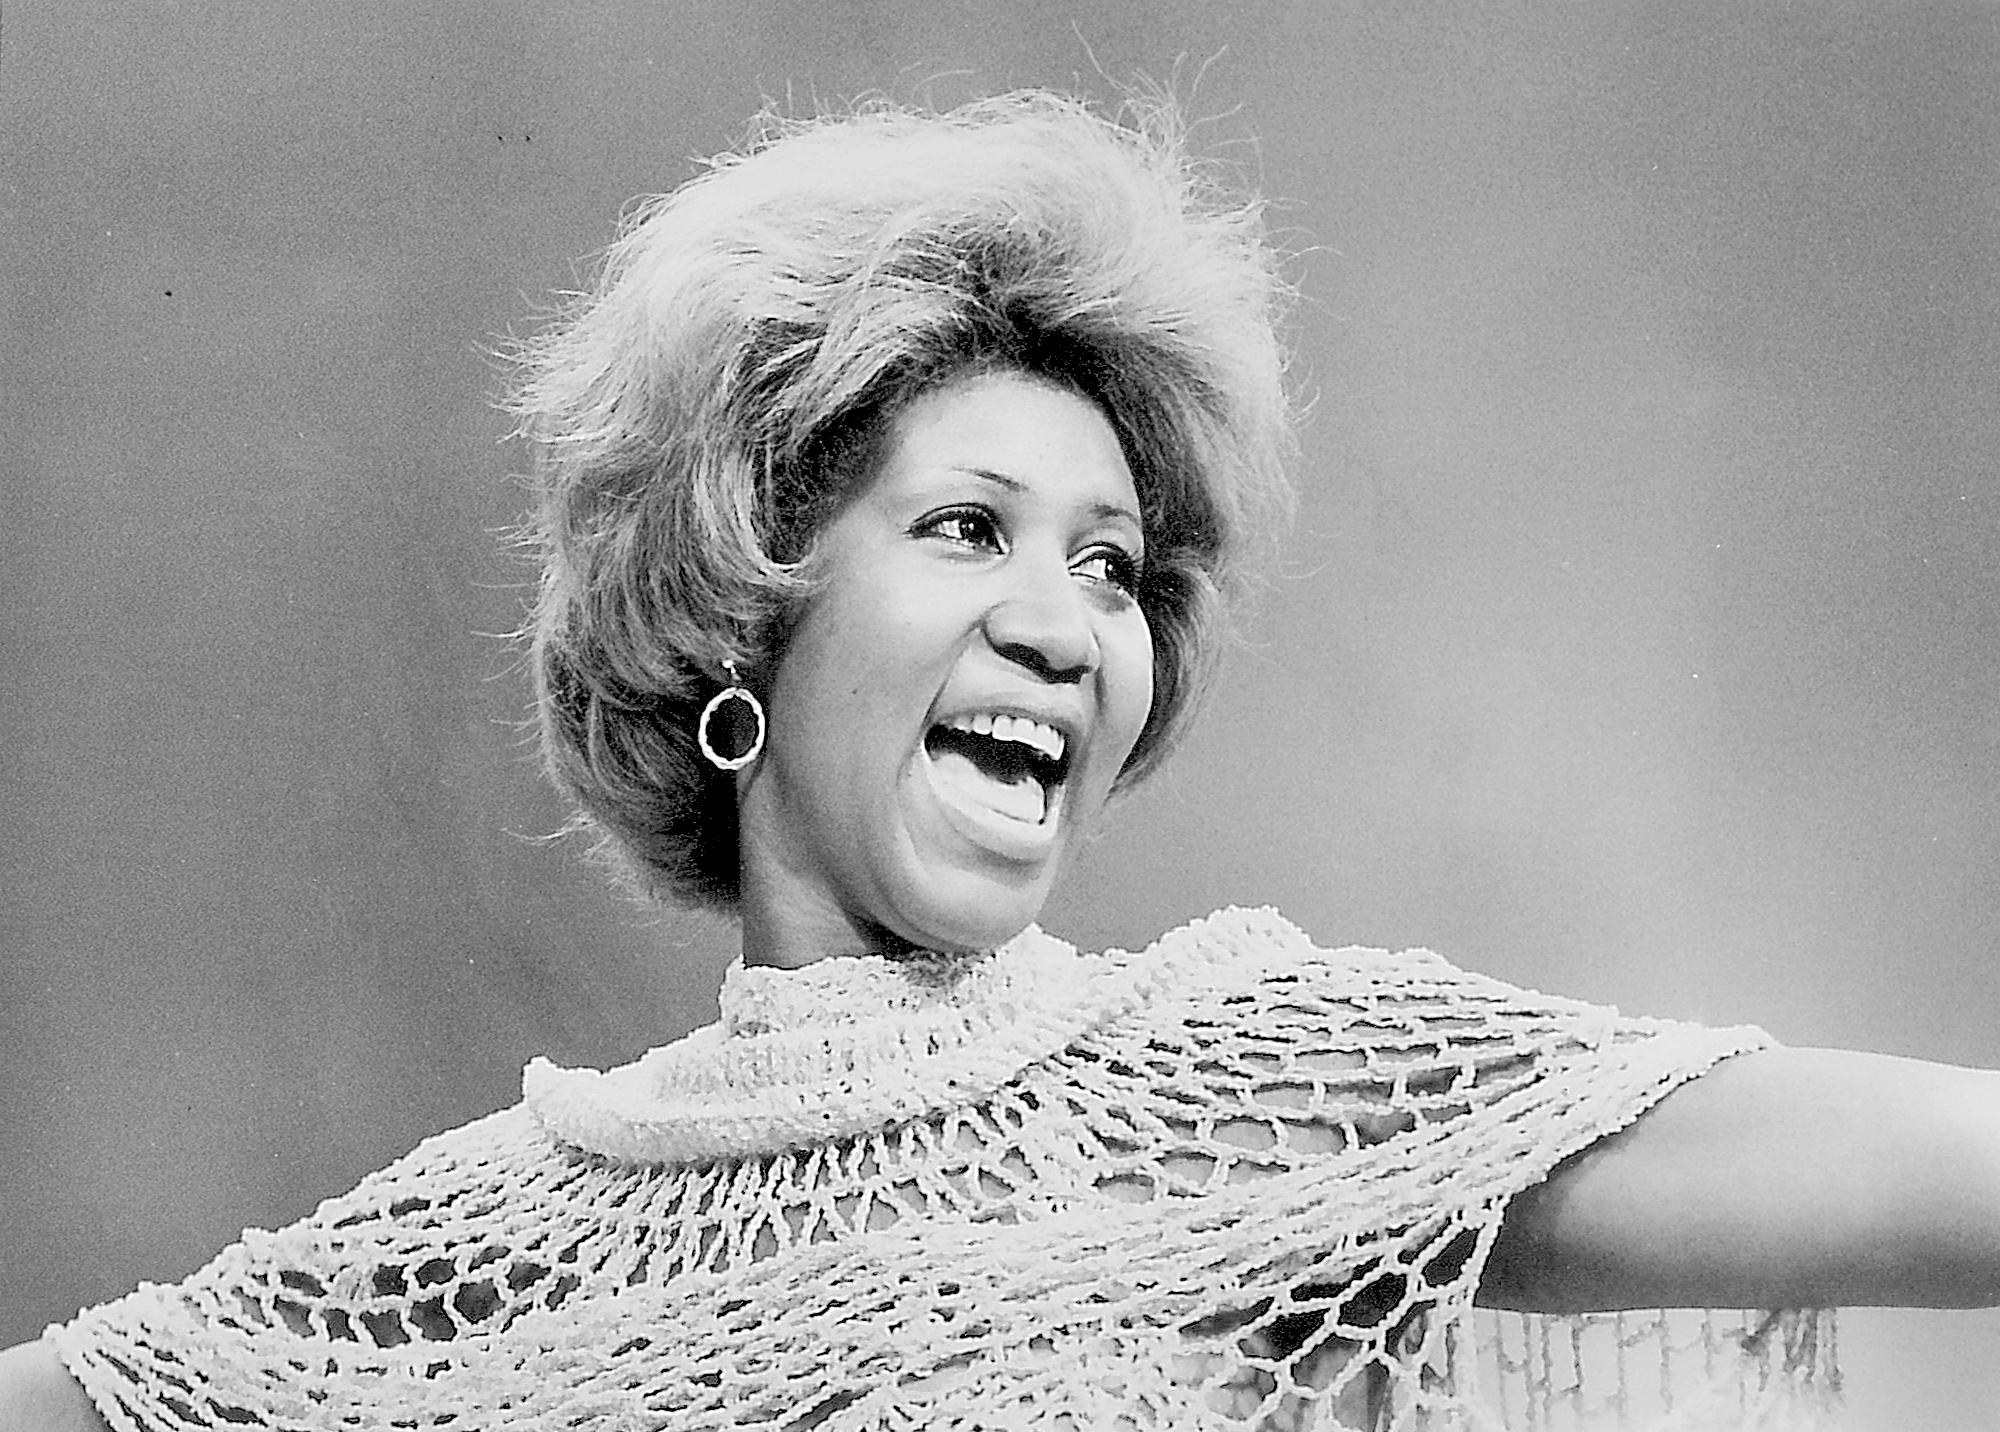 Queen of Soul” Aretha Franklin to perform at Colgate